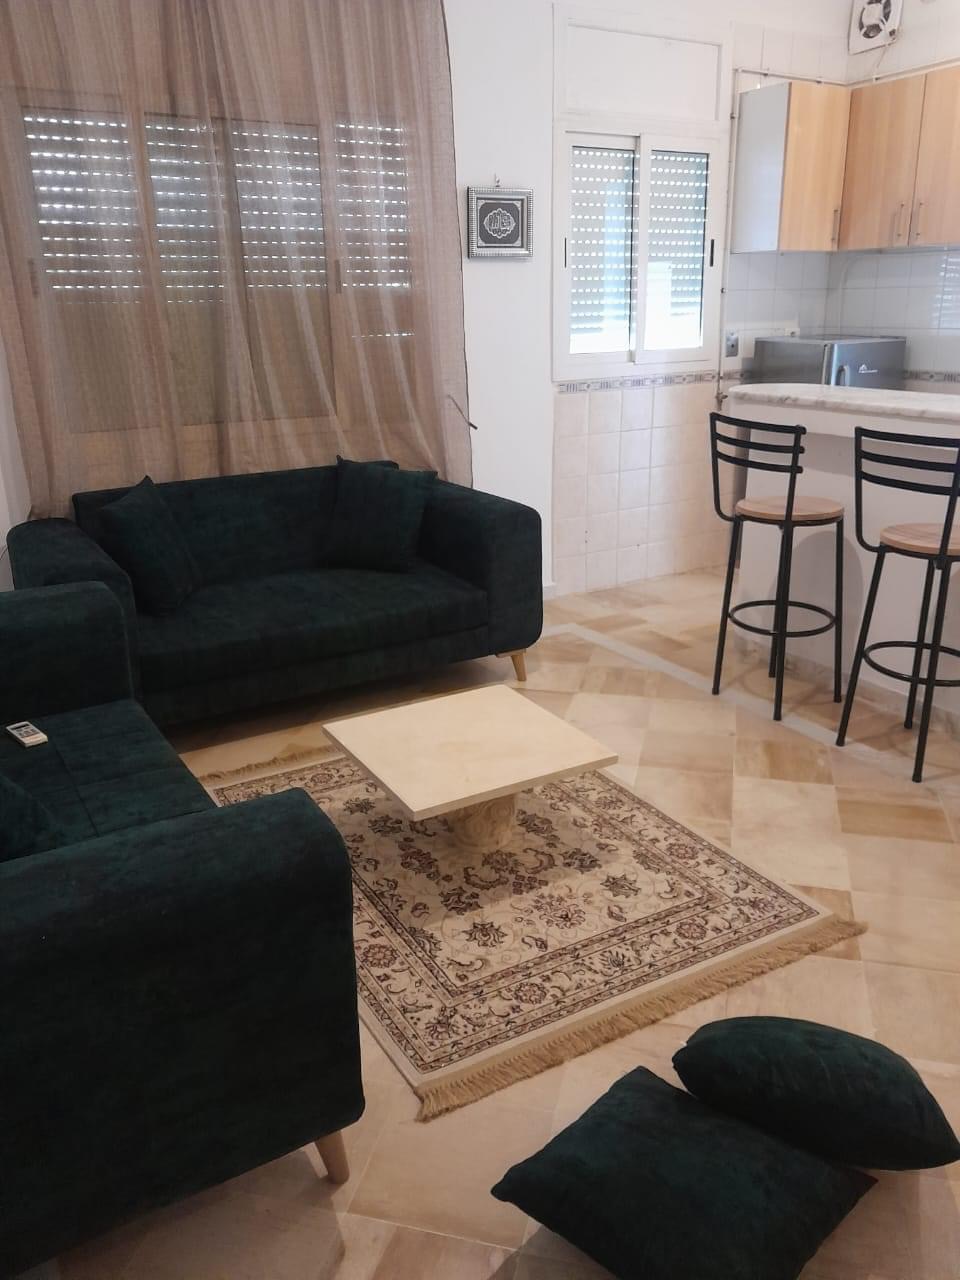 Ariana Ville Cite Ennasr 1 Location Appart. 2 pices Appartement s1 meuble 1200